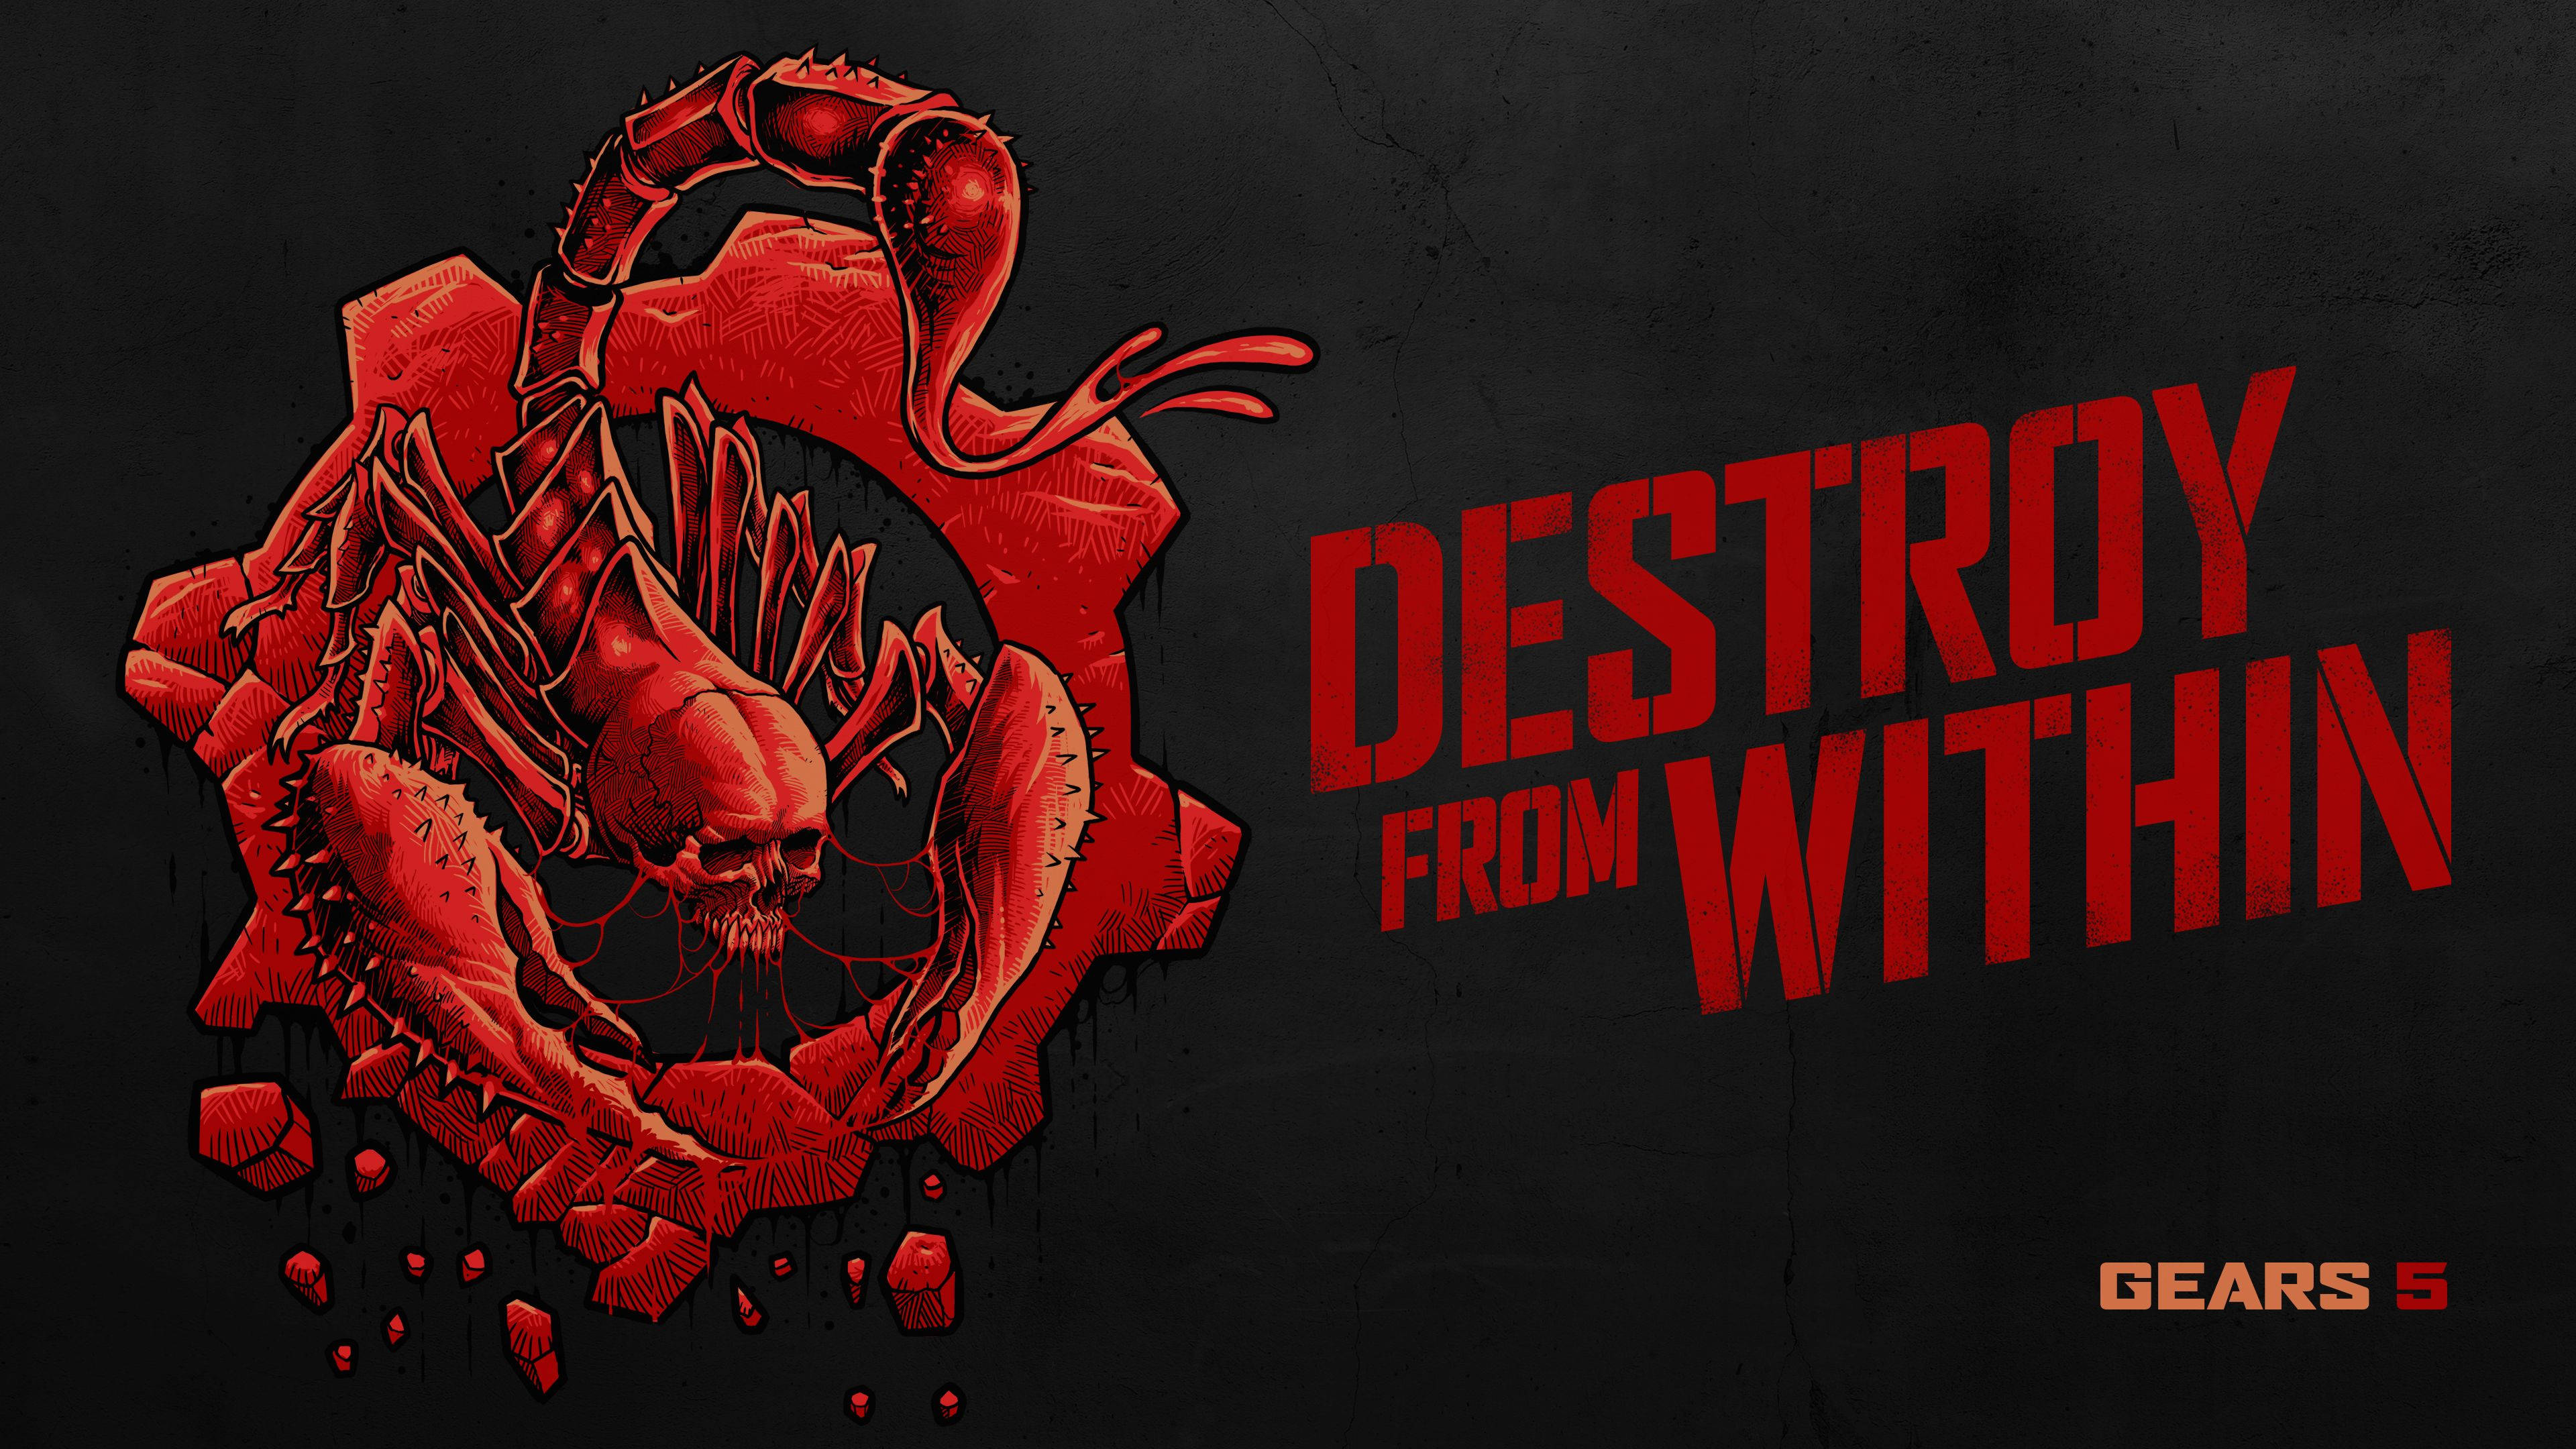 Gears 5 Destroy From Within Logo Background